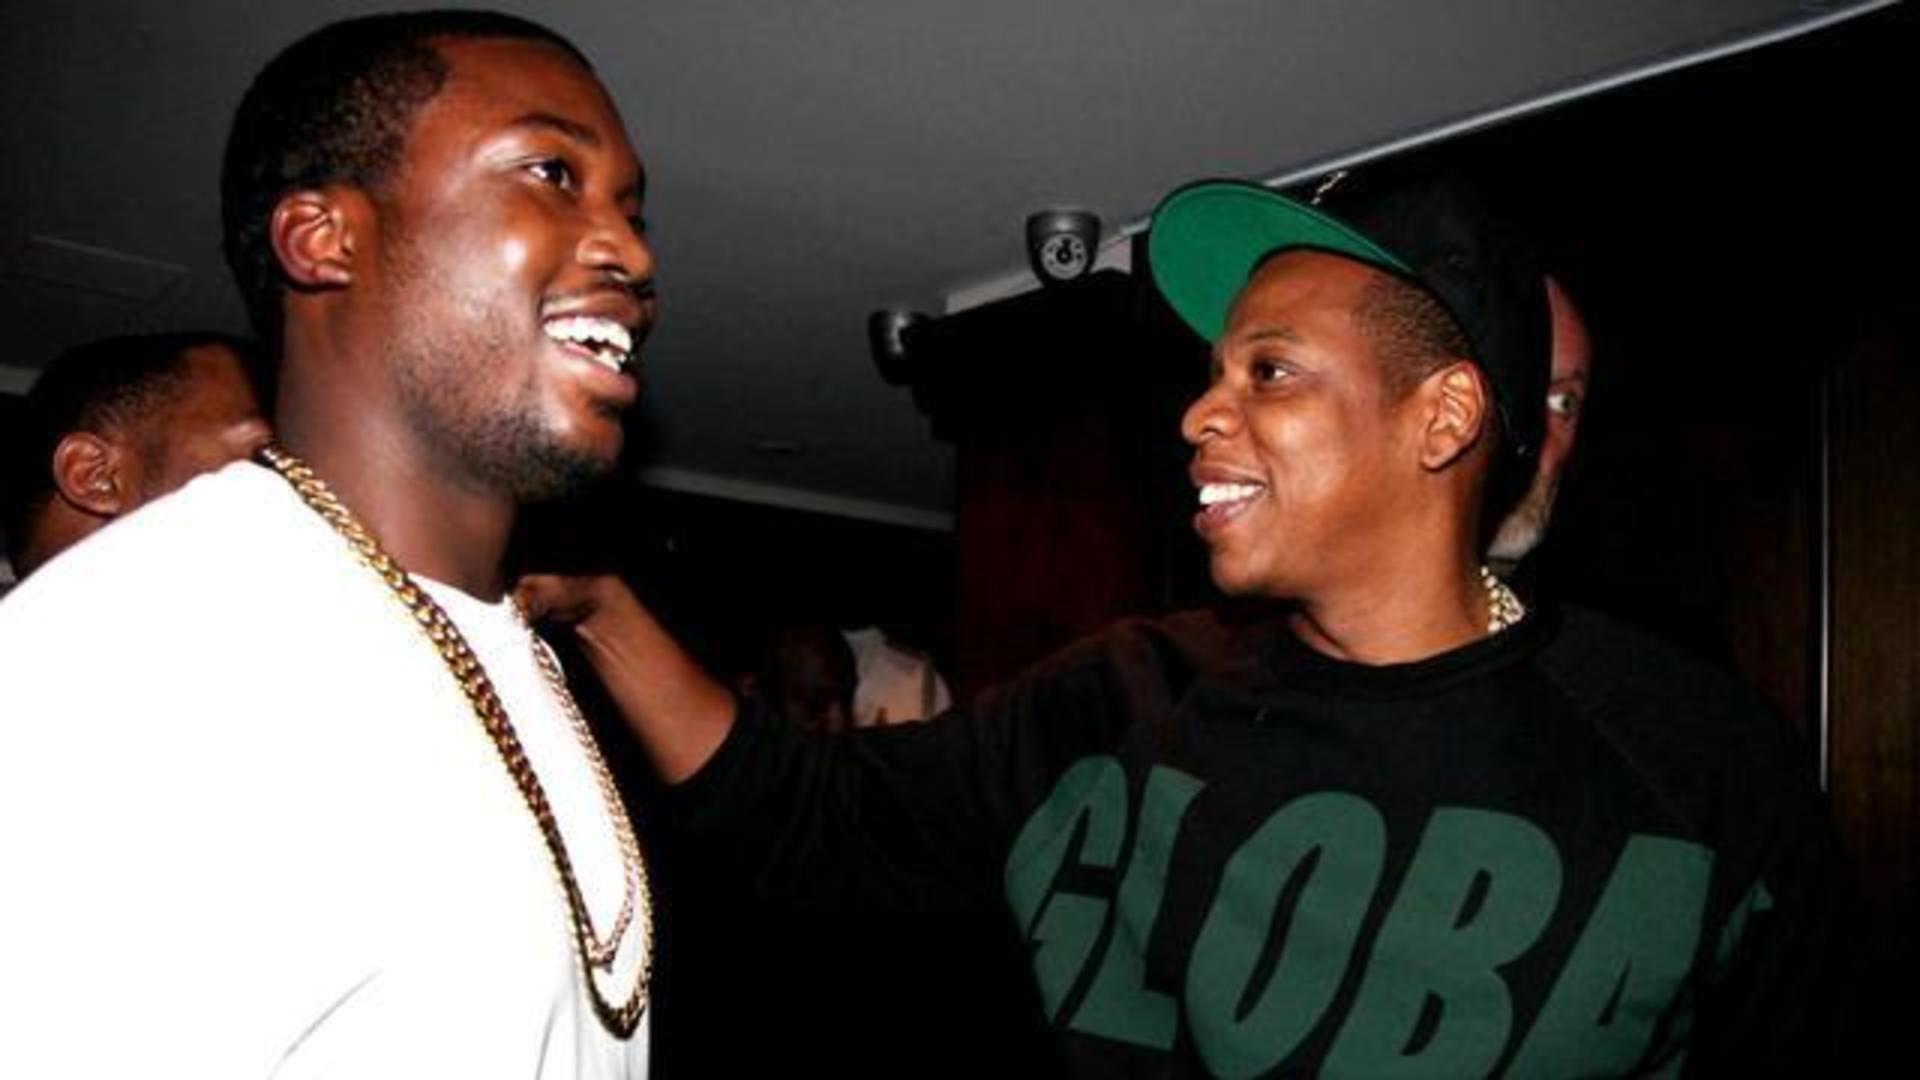 Rapper Meek Mill vows to fight antisemitism after visit to